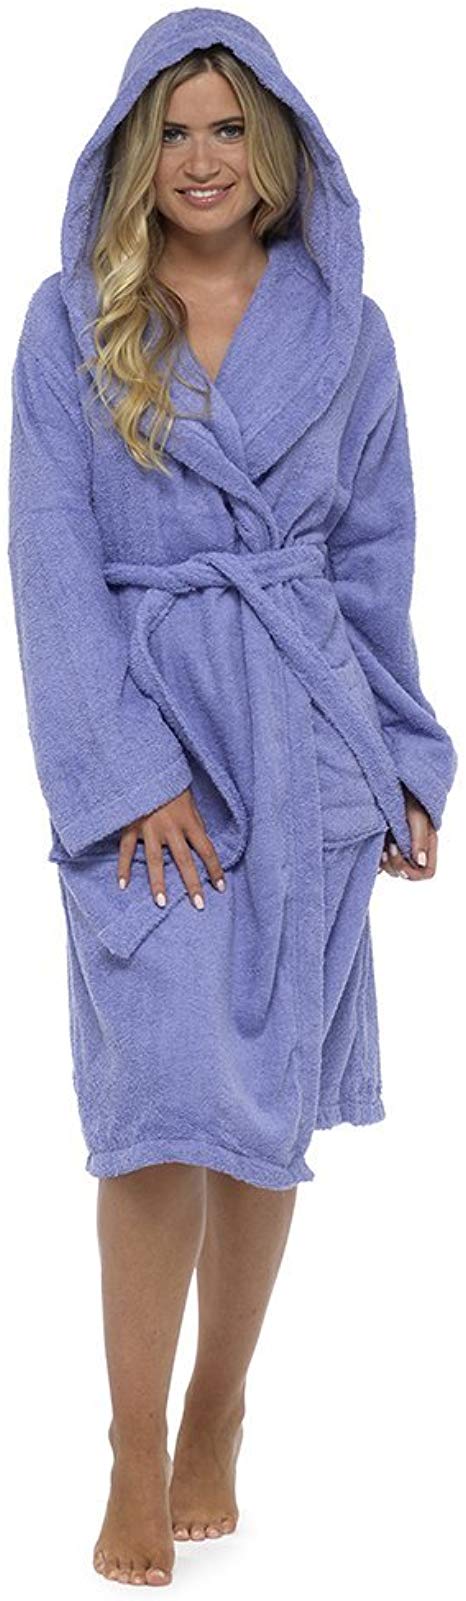 Ladies Robe Luxury Terry Towelling Cotton Dressing Gown Bathrobe Highly Absorbent Women Hooded and Shawl Towel Bath Wrap